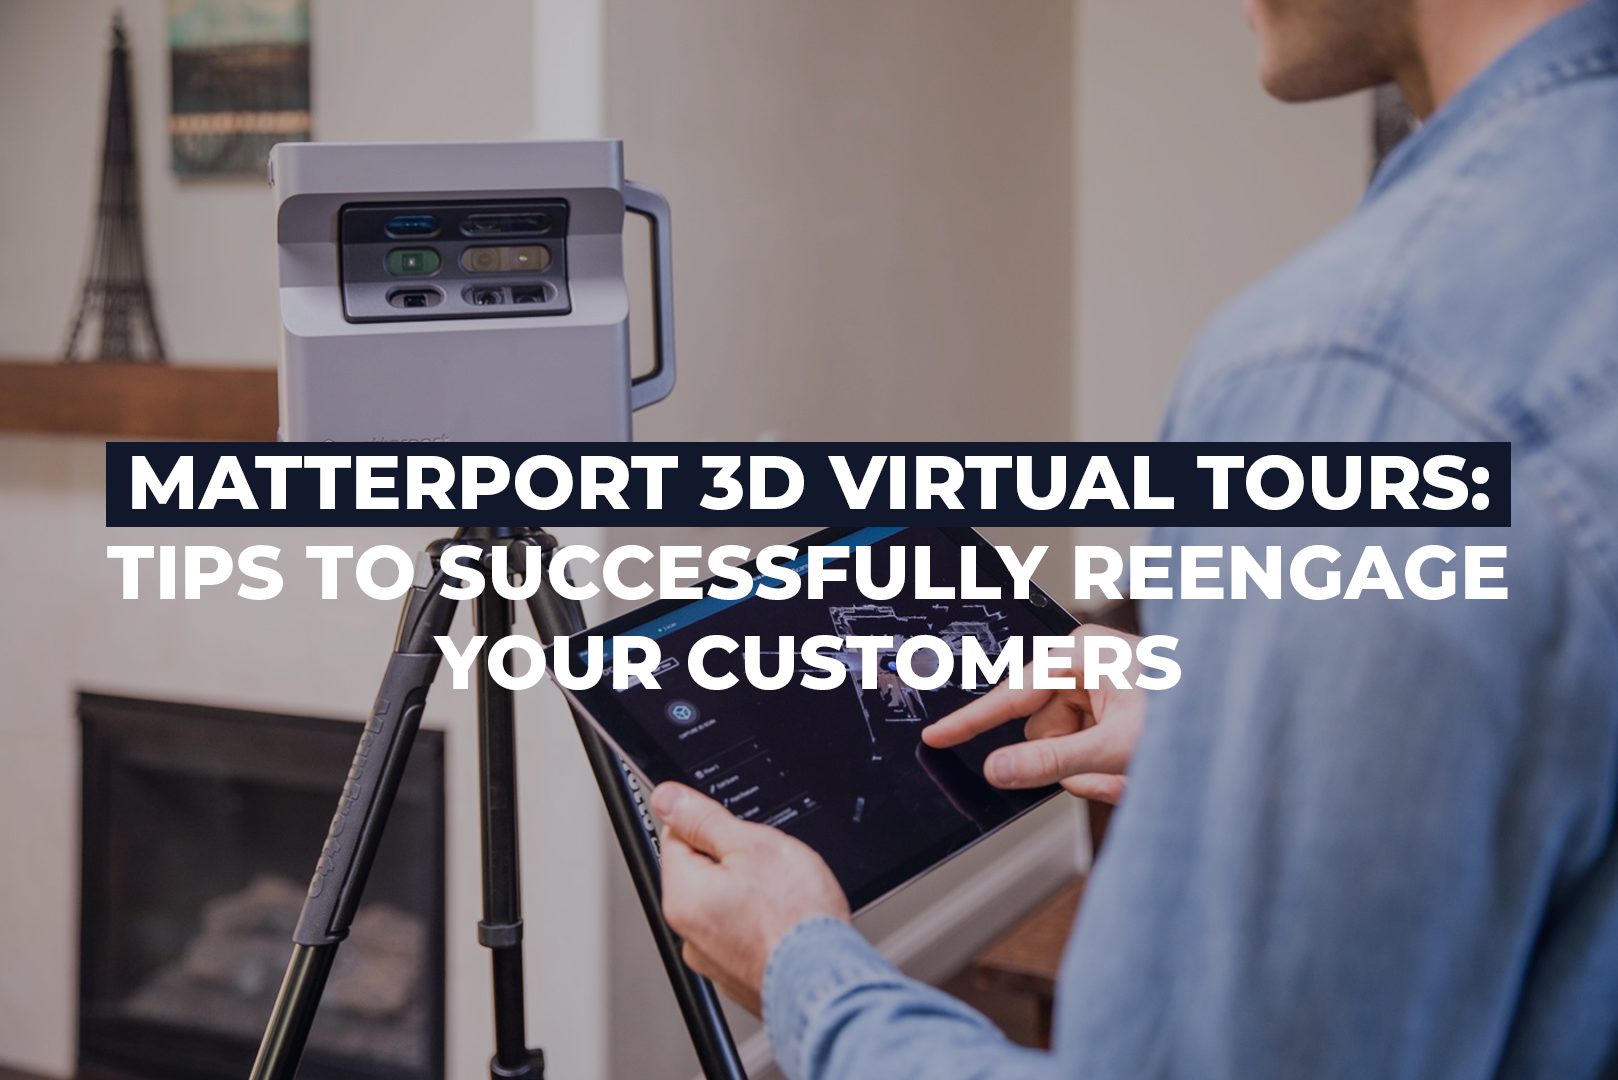 Matterport 3D Virtual Tours: Tips To Successfully Reengage Your Customers